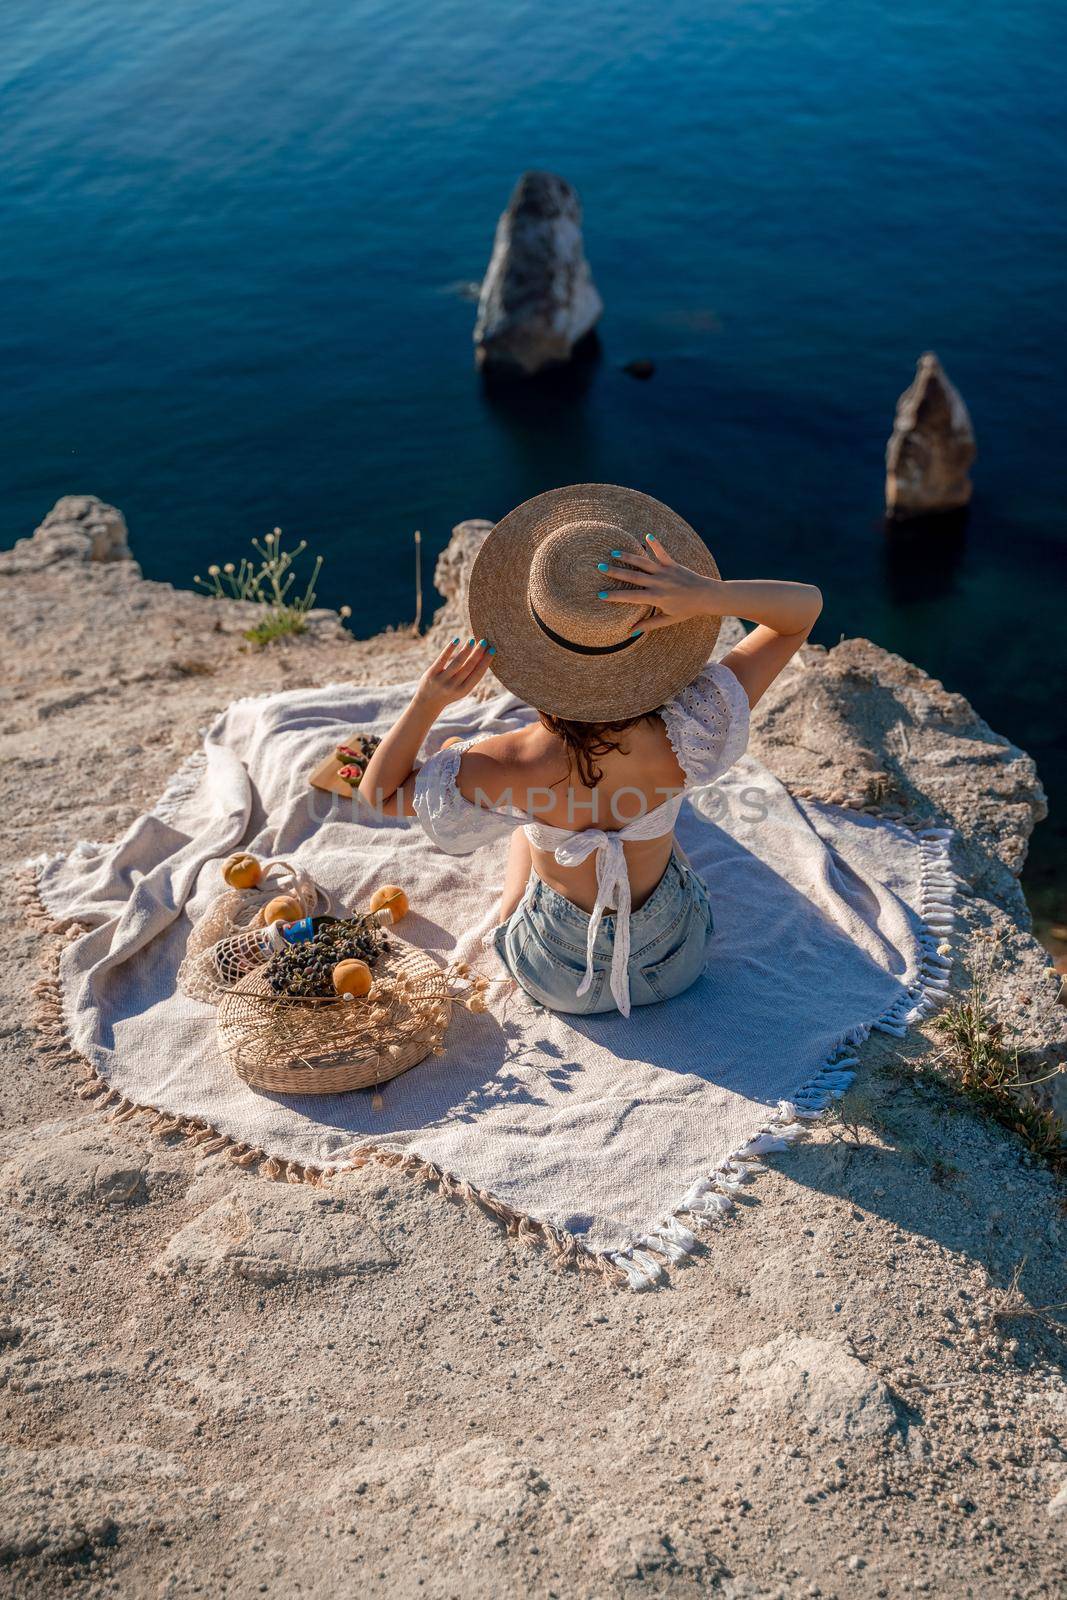 Street photo of a beautiful woman with dark hair in a white top, shorts and a hat having a picnic on a hill overlooking the sea.